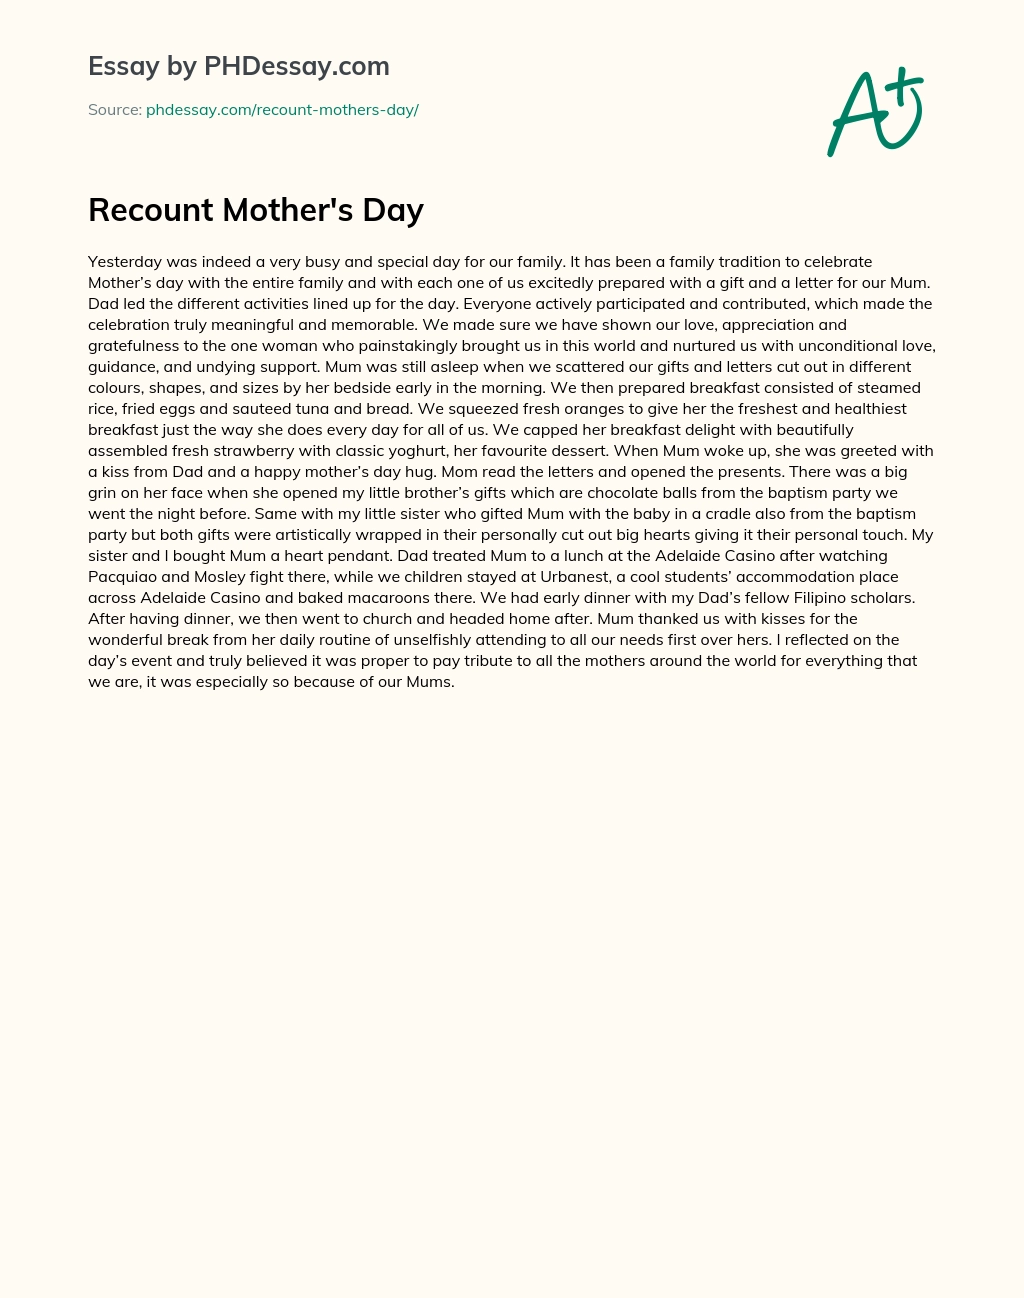 Recount Mother’s Day essay